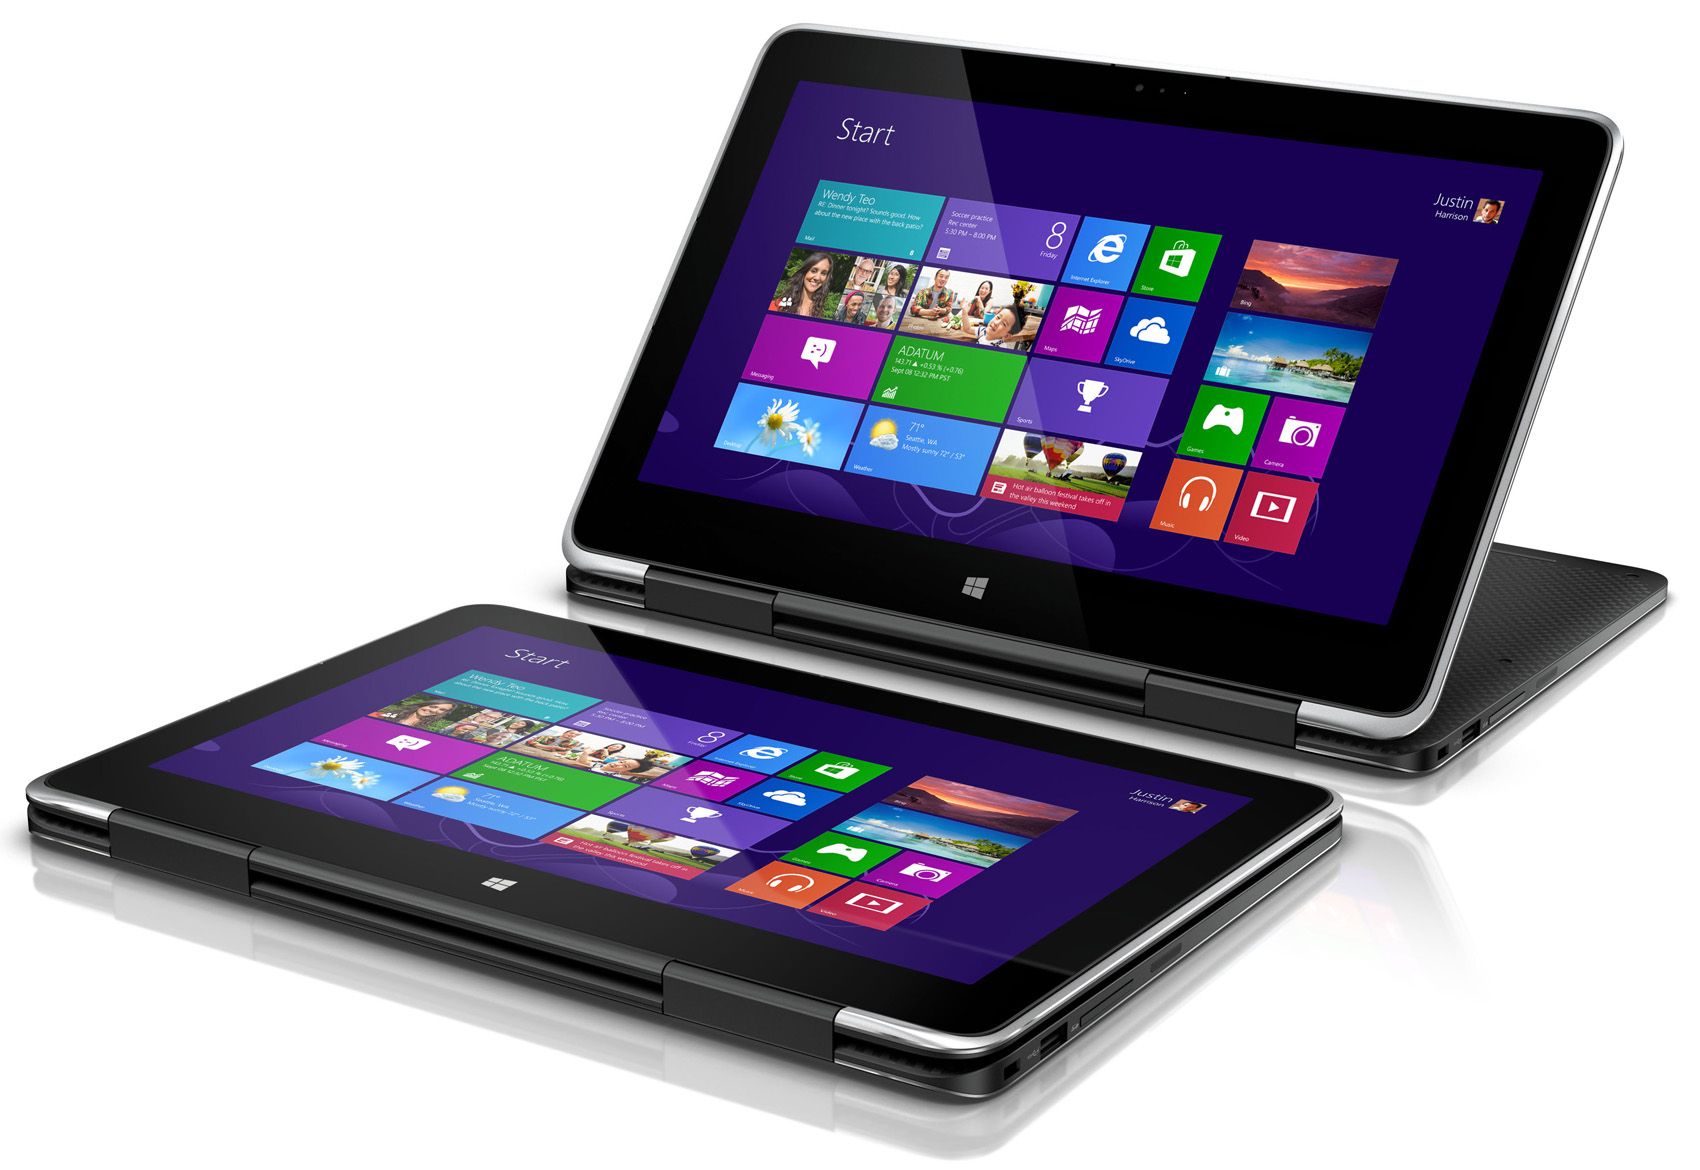 dell xps 11 convertible ultrabook official image 1